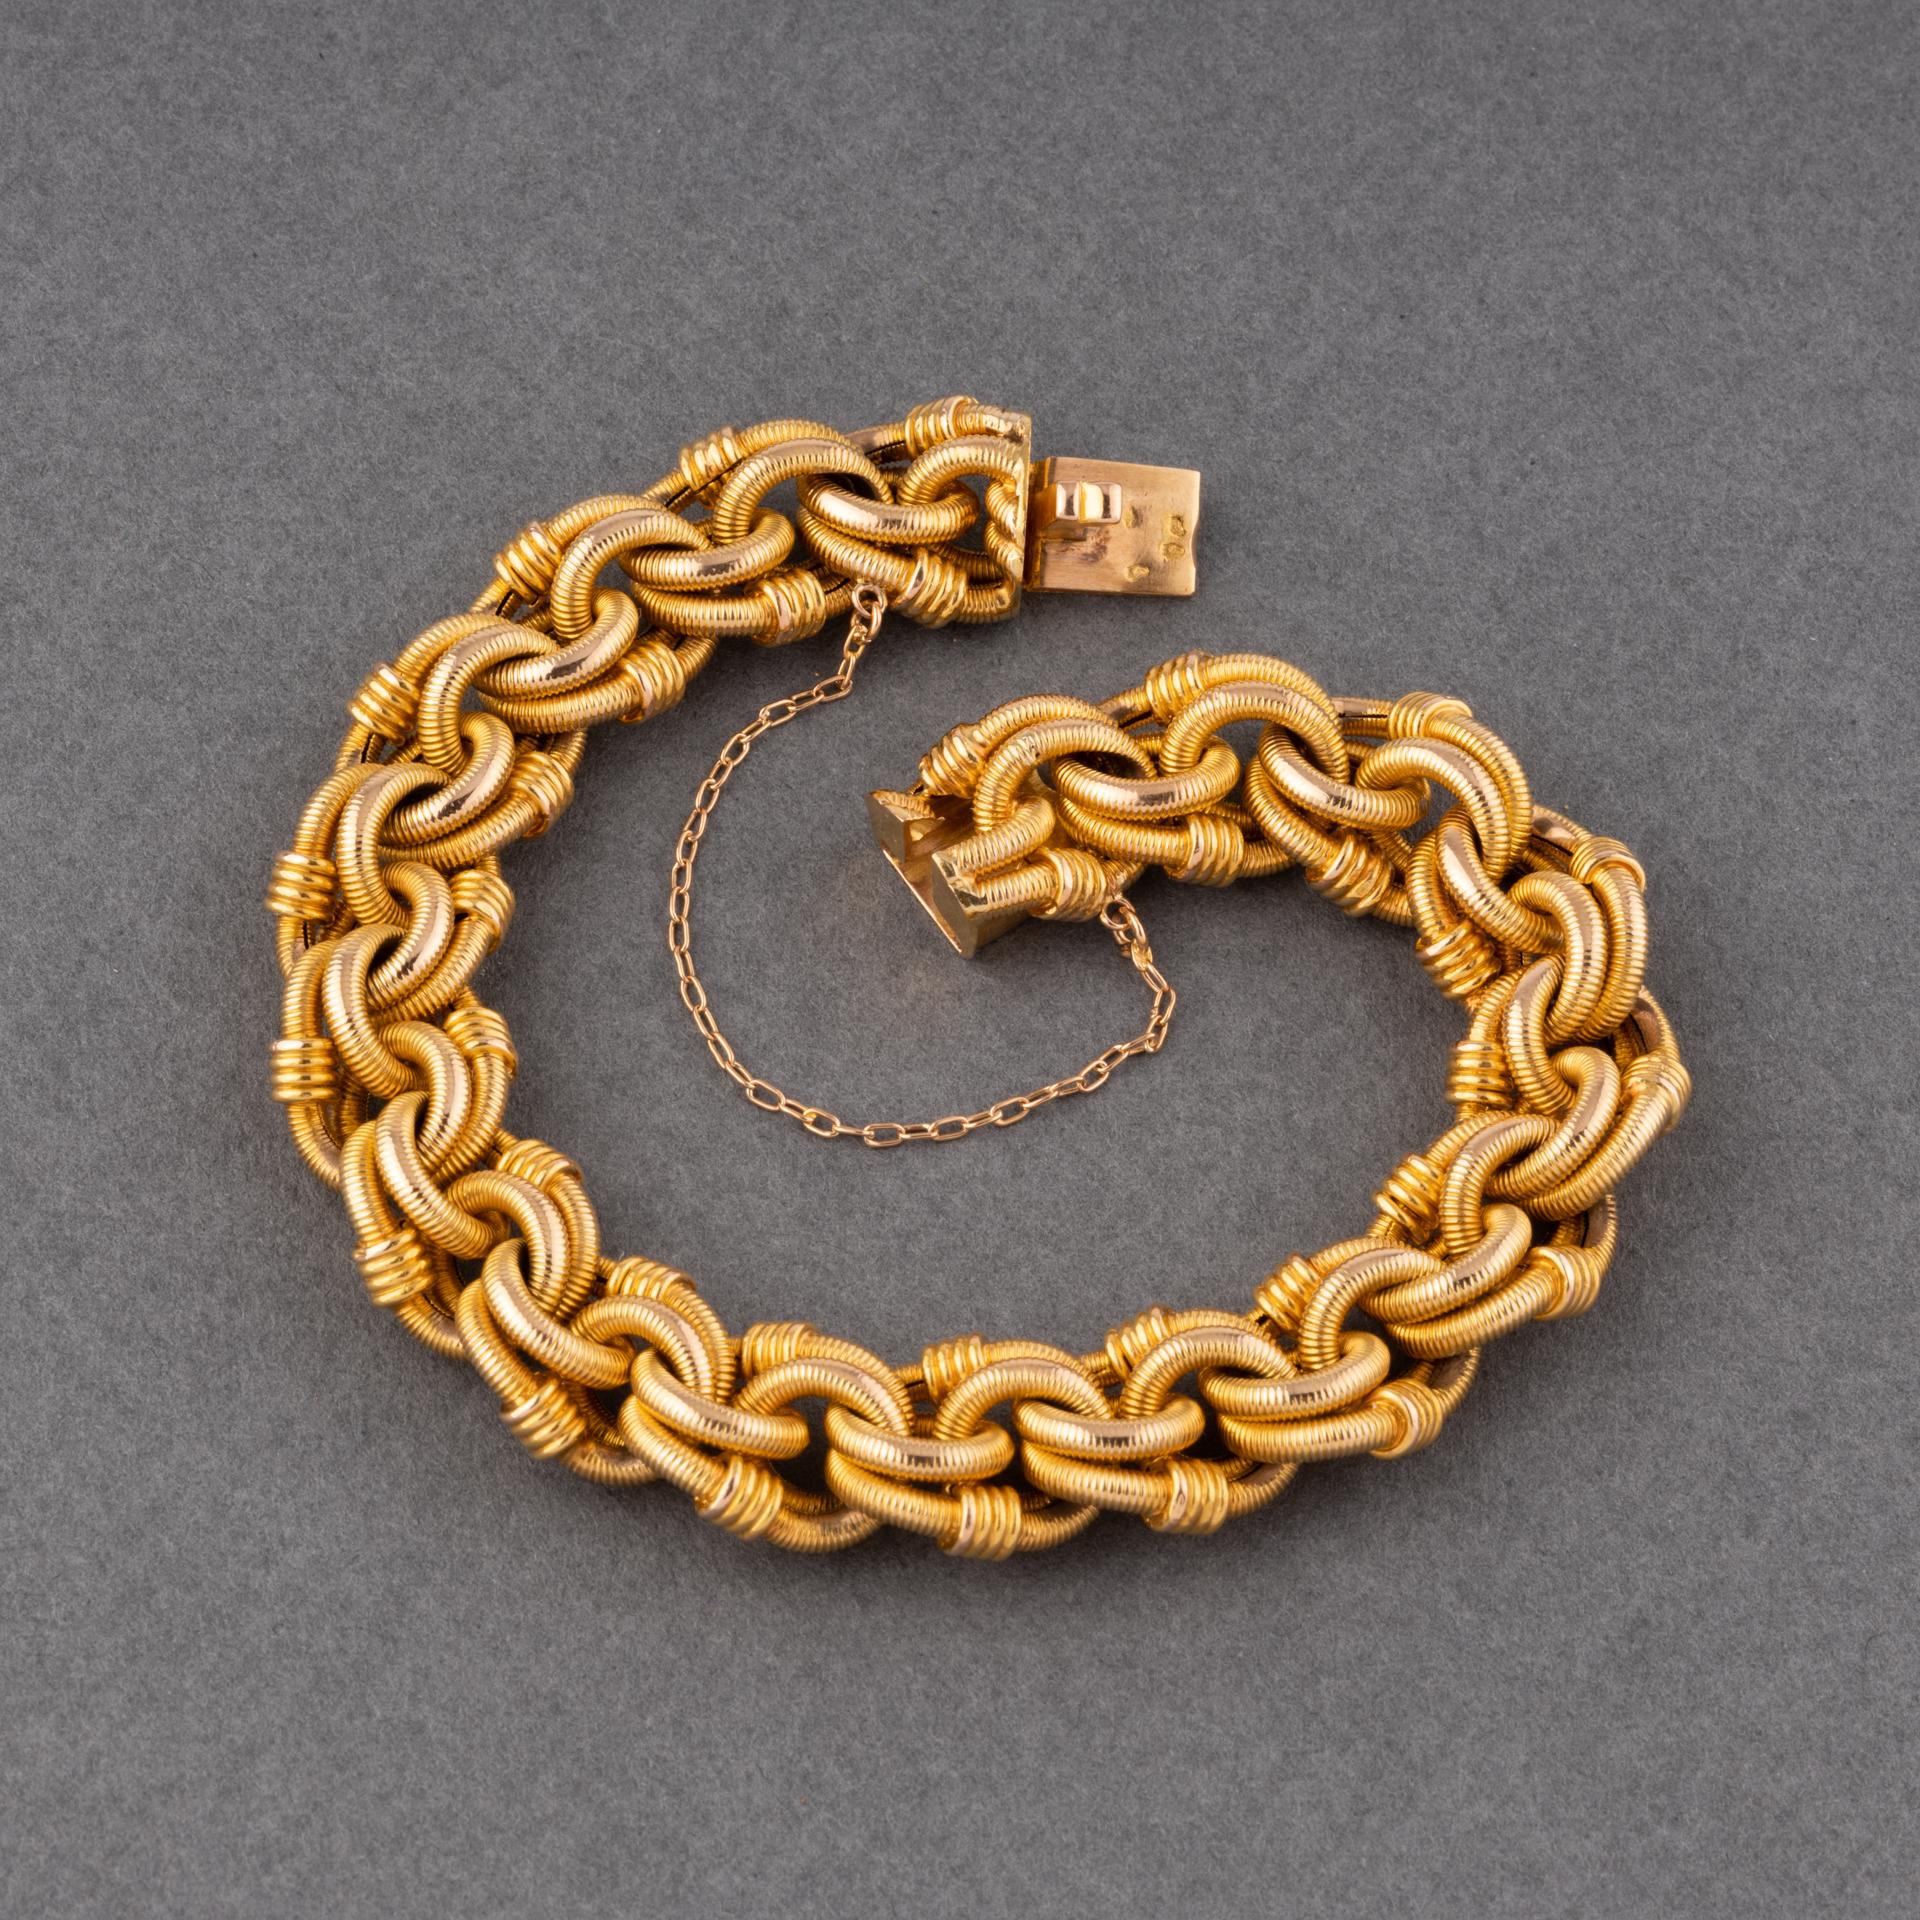 A lovely antique bracelet, made in France circa 1890.
Made in yellow gold 18k, multiple hallmarks (eagle head/rhino head).
The size is quite big 18.5 cm.
The width of bracelet is 13mm.
Weight: 35.70 grams.